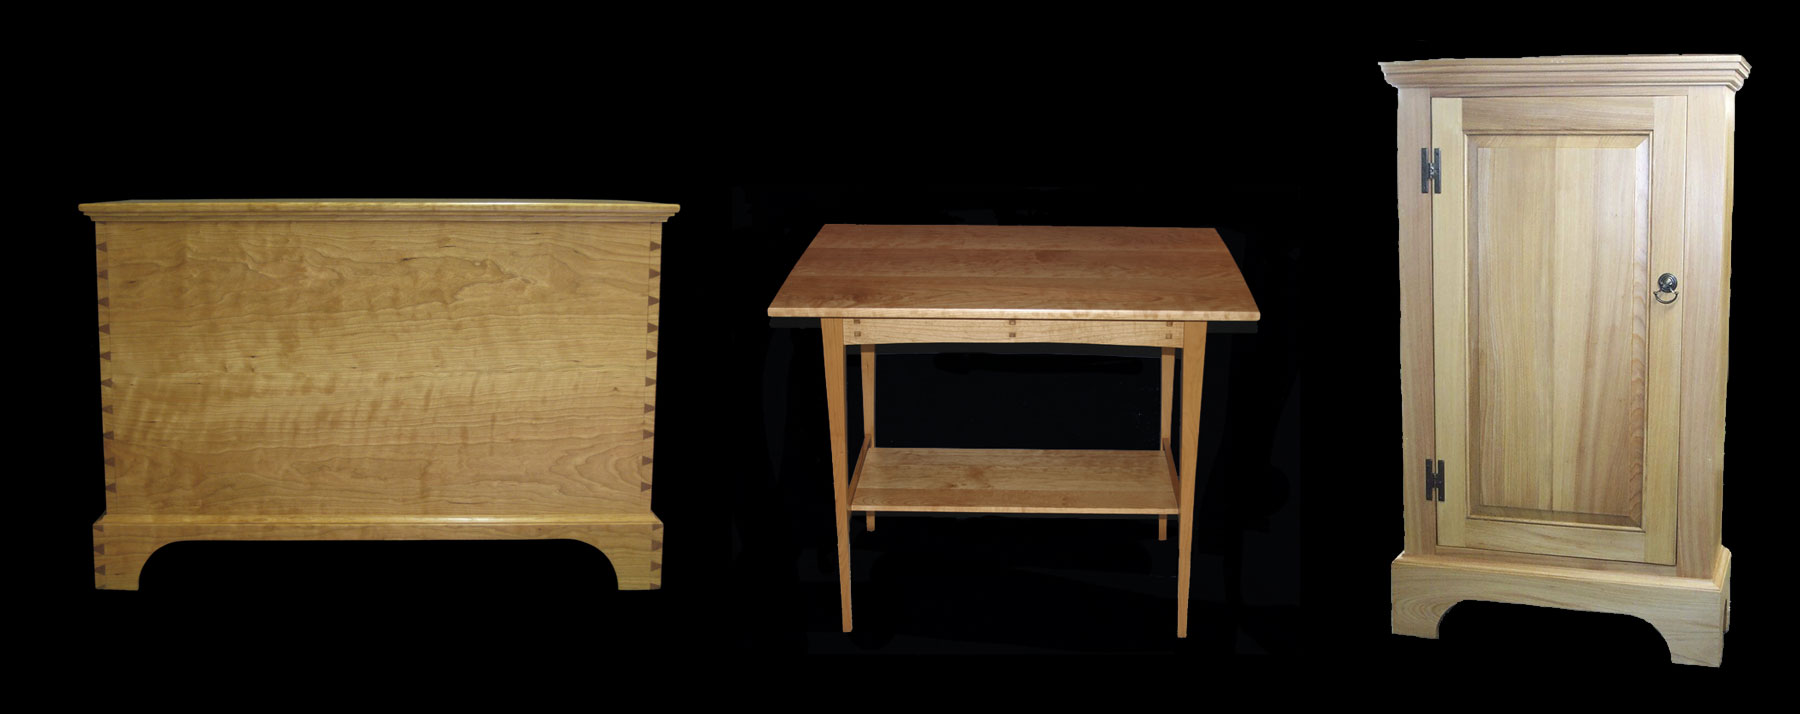 Hand made wood tables and chests